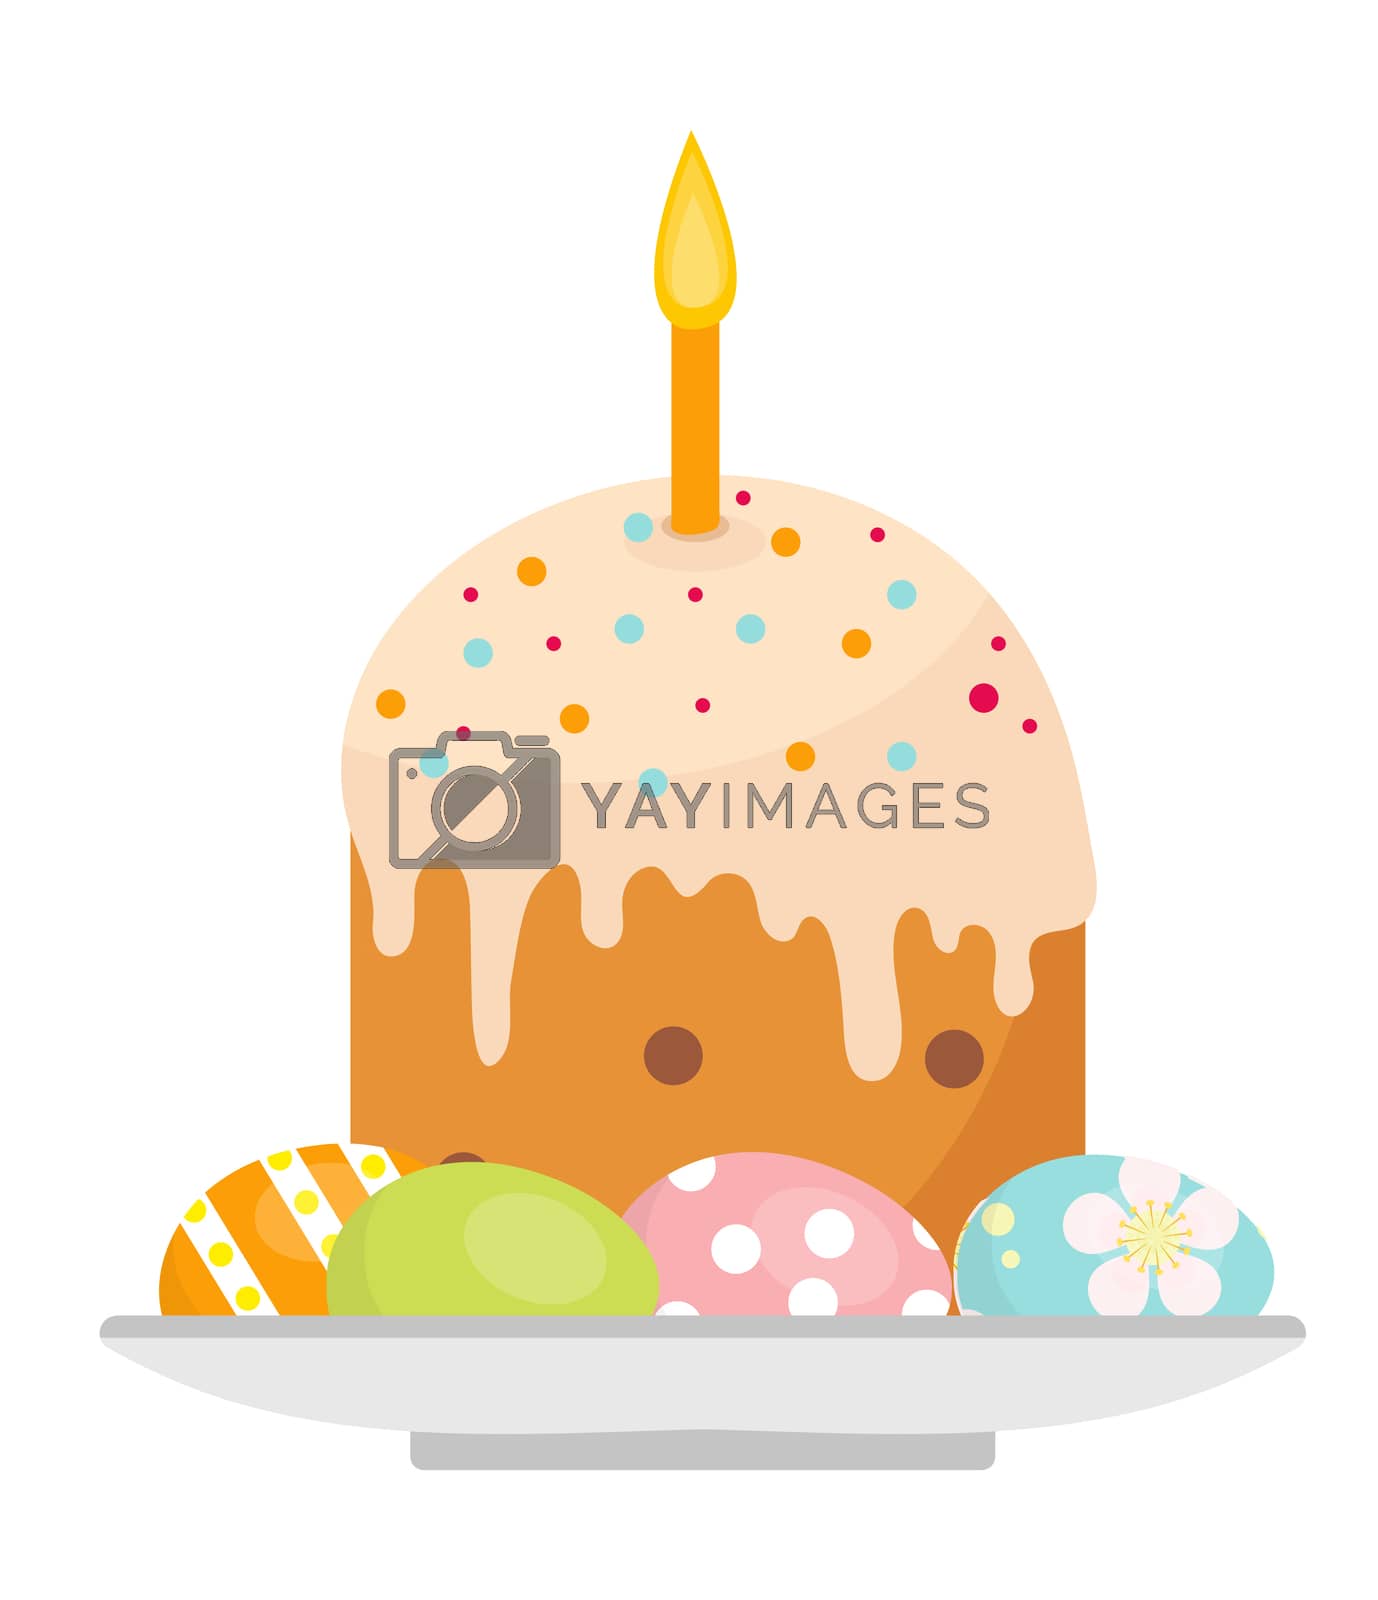 Royalty free image of Easter cake with candles on a plate with eggs icon, flat style. Isolated on white background. illustration, clip-art. by lucia_fox